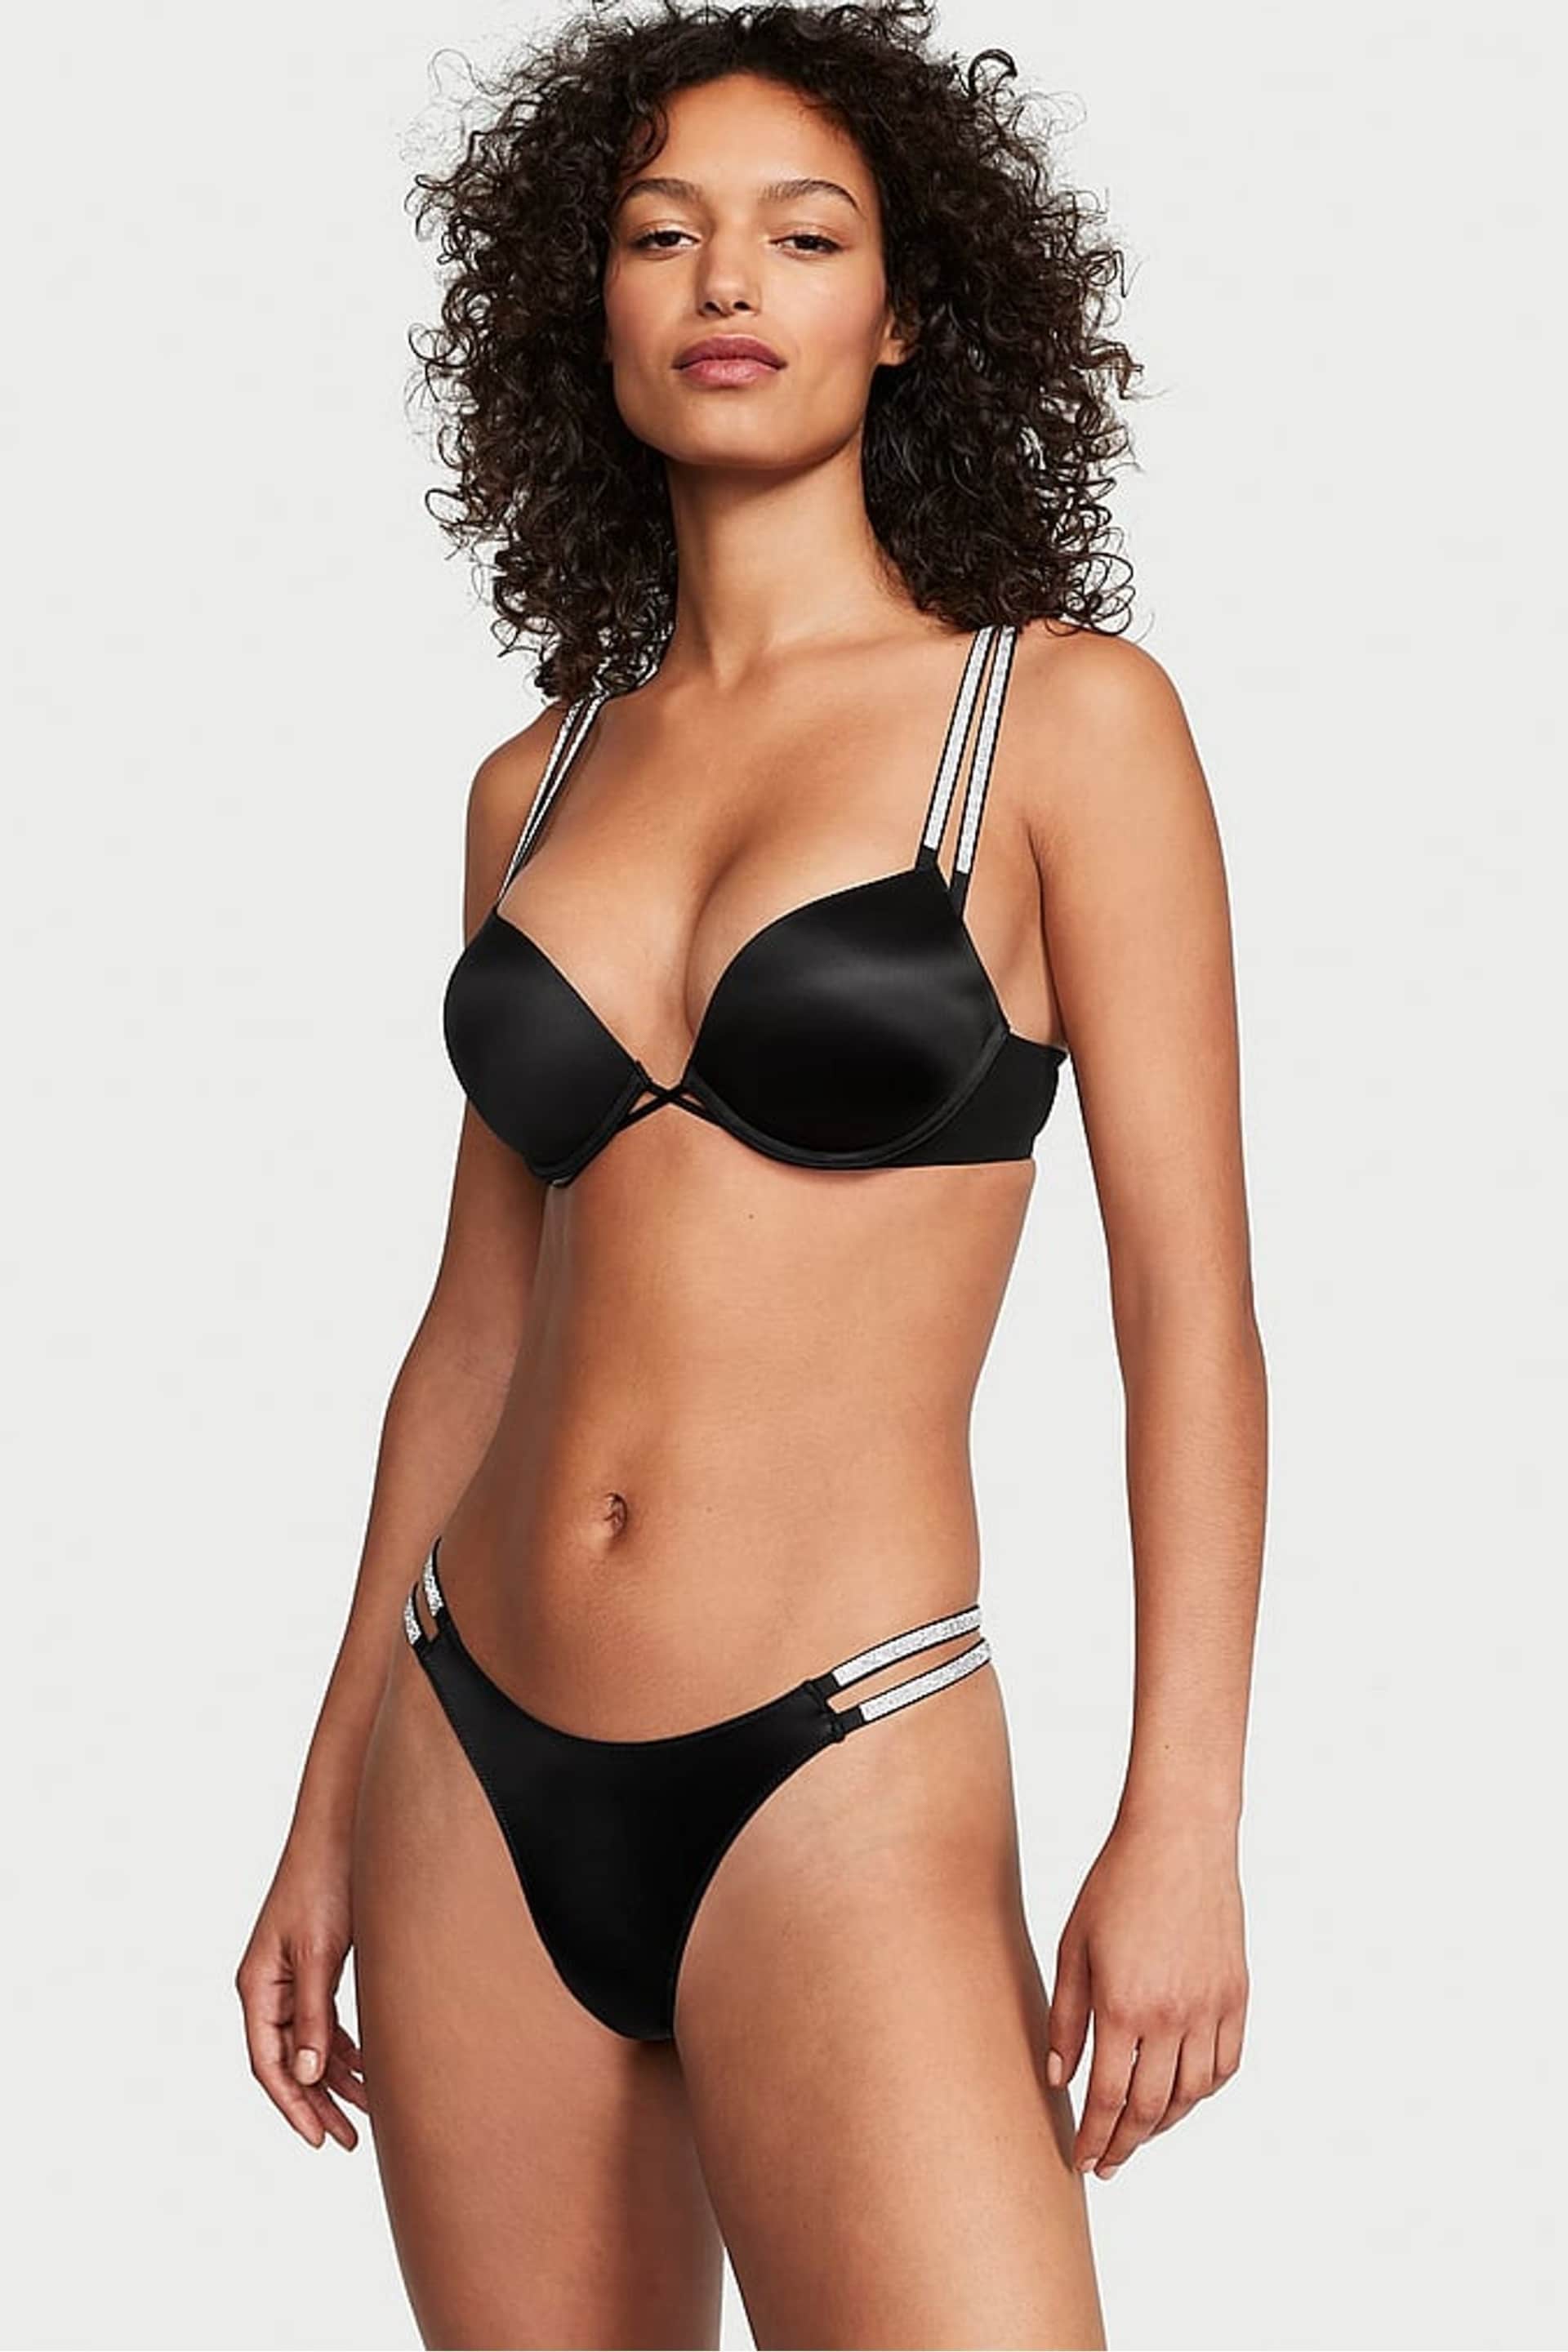 Victoria's Secret Black Add 2 Cups Push Up Double Shine Strap Add 2 Cups Push Up Bombshell Bra - Image 3 of 4